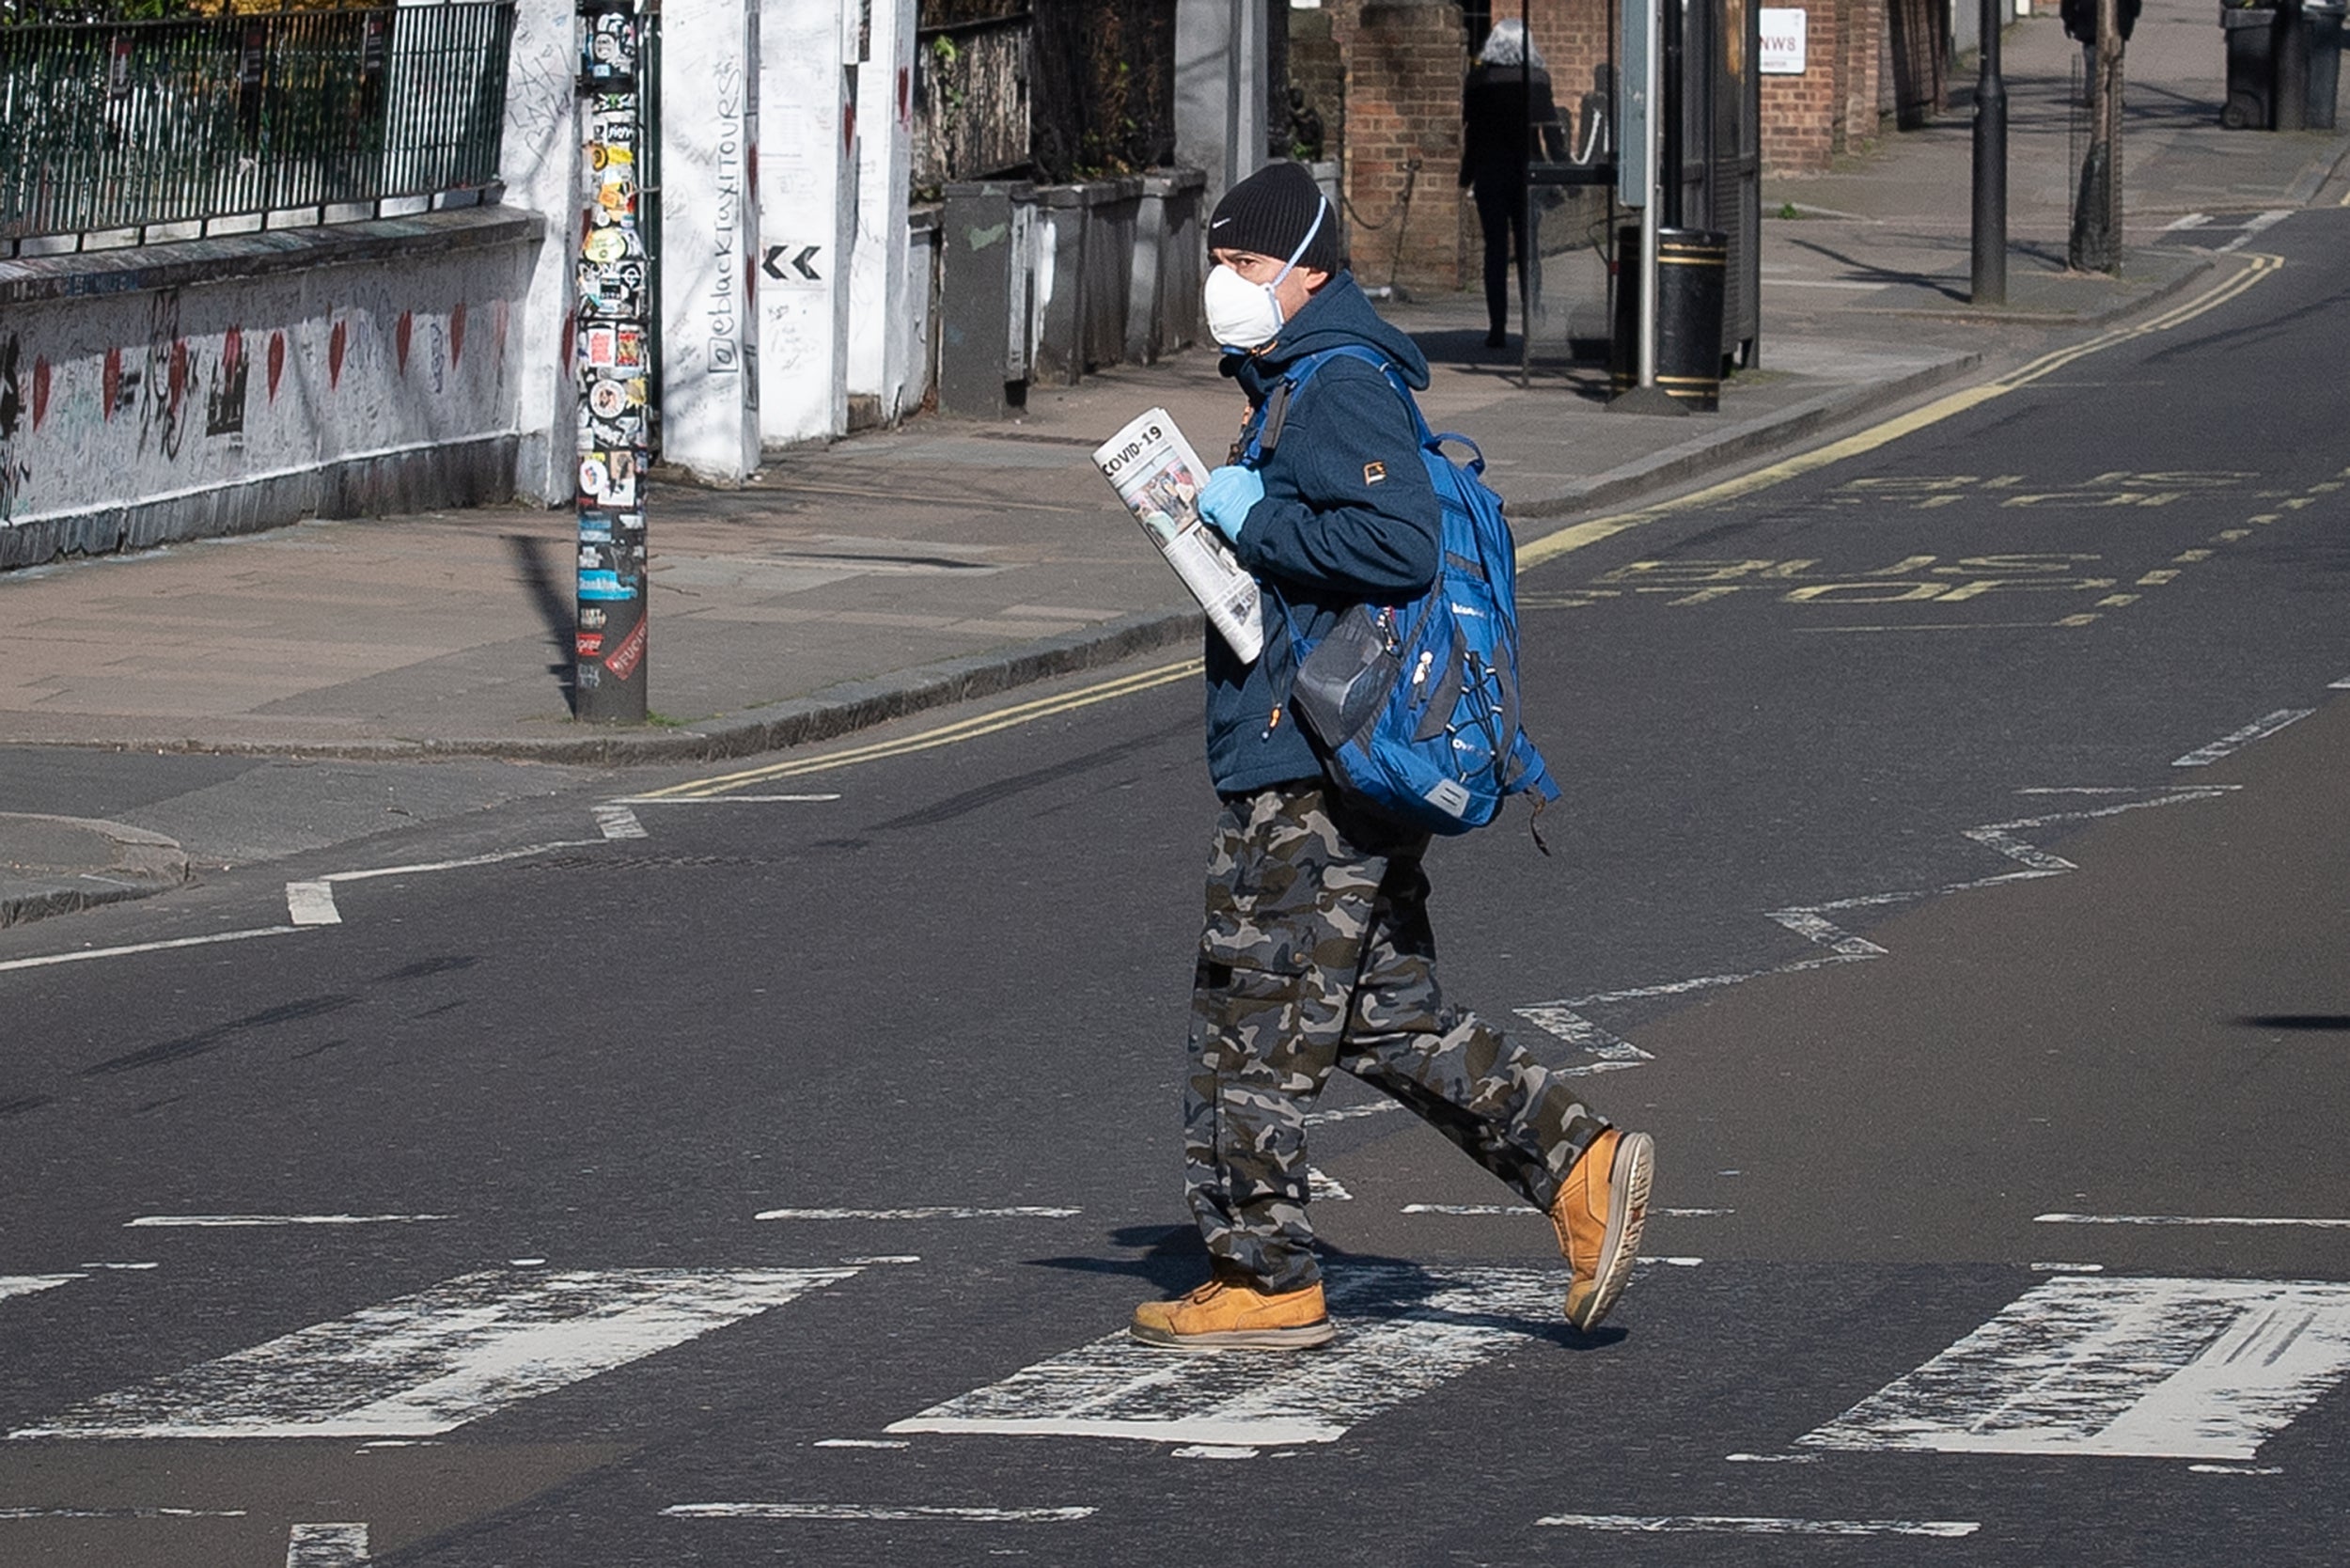 A member of the public wearing a protective mask walks on the Abbey Road pedestrian crossing